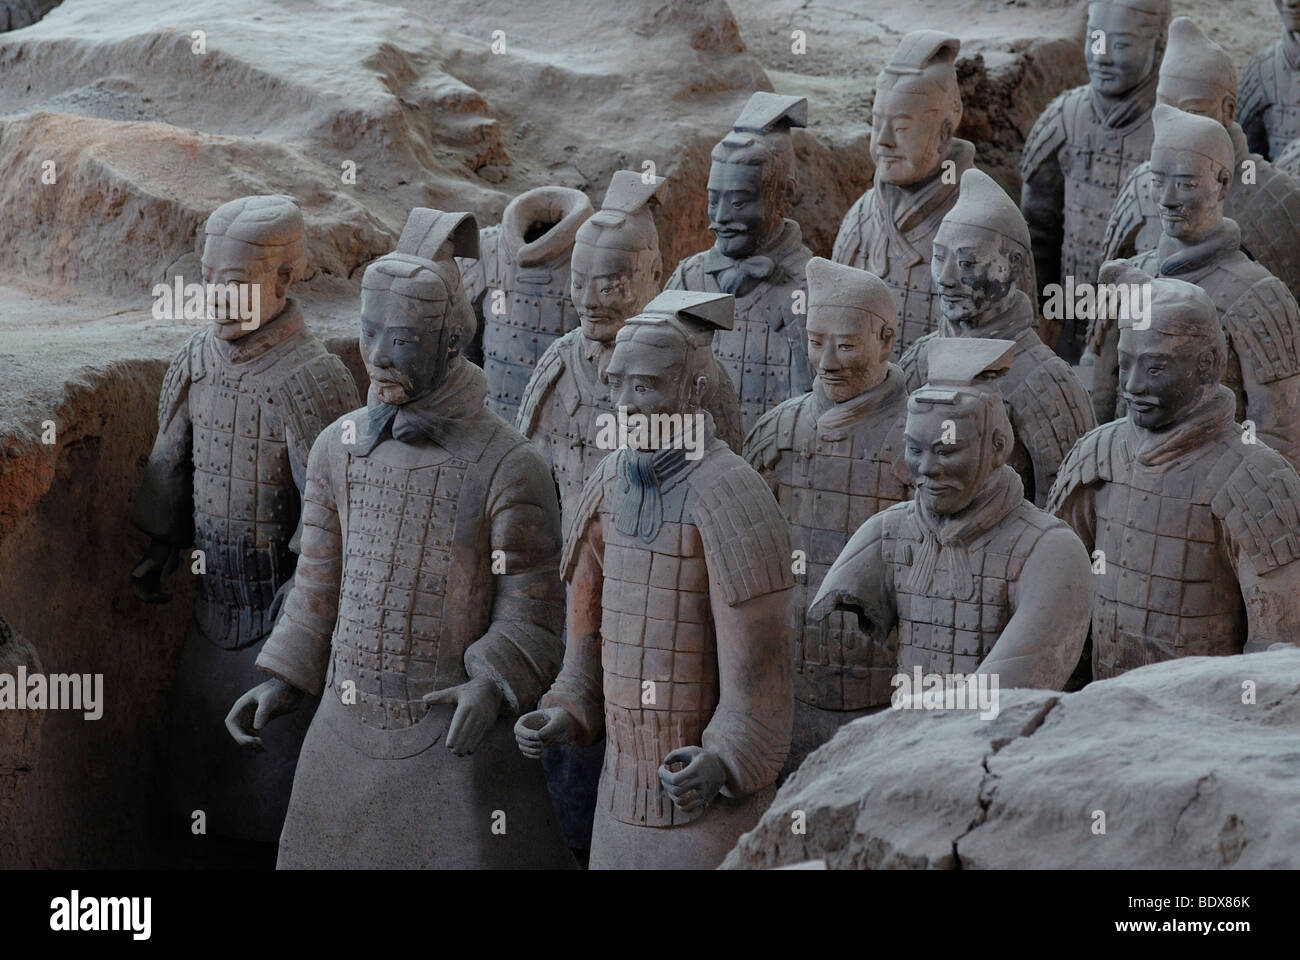 Terracotta Army, part of the burial site, hall 1, mausoleum of the 1st Emperor Qin Shihuangdi in Xi'an, Shaanxi Province, China Stock Photo